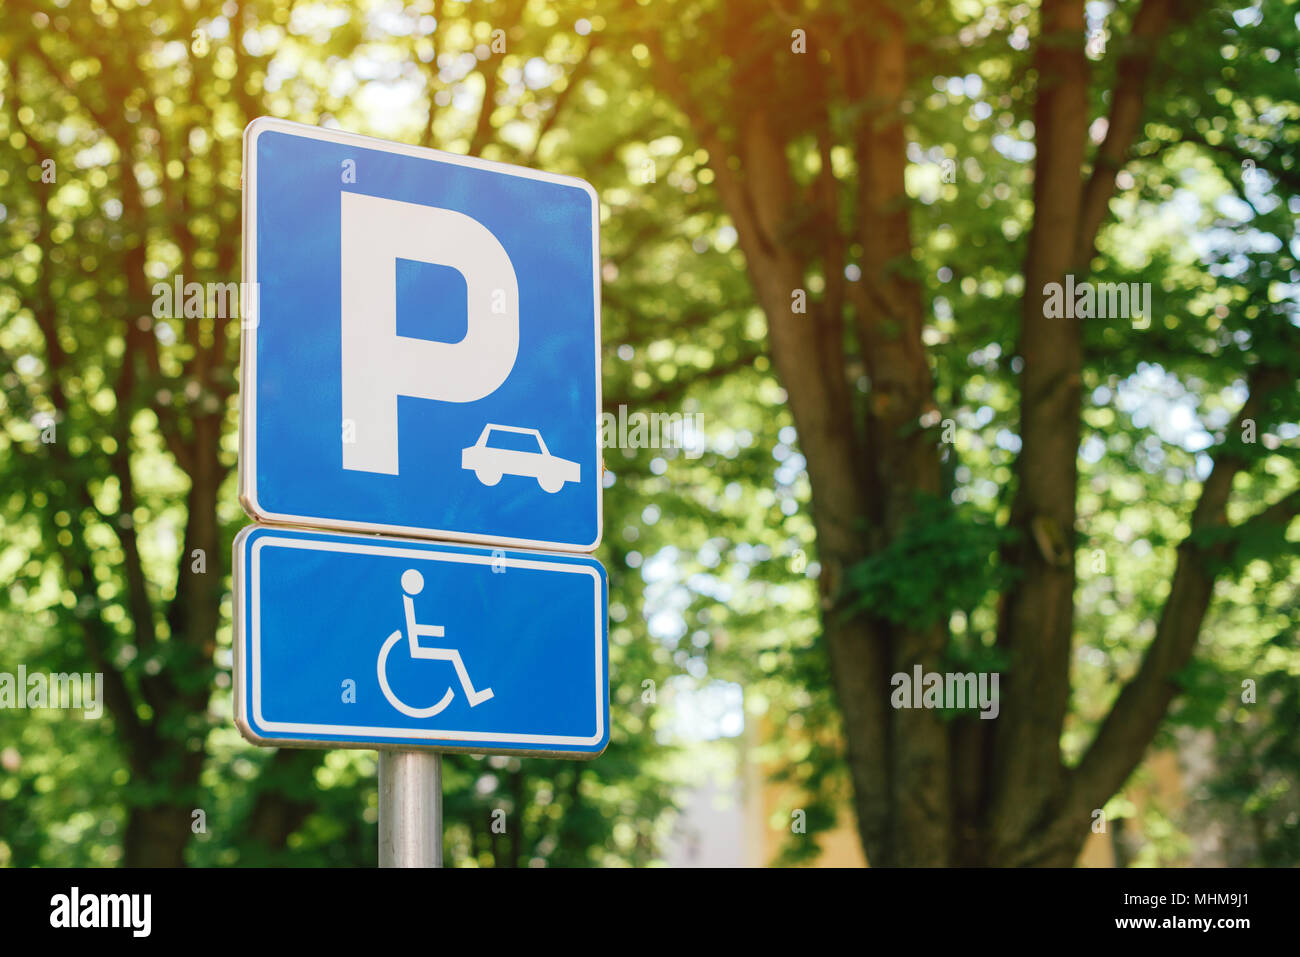 Handicap parking spot sign, reserved lot space for disabled person, selective focus Stock Photo